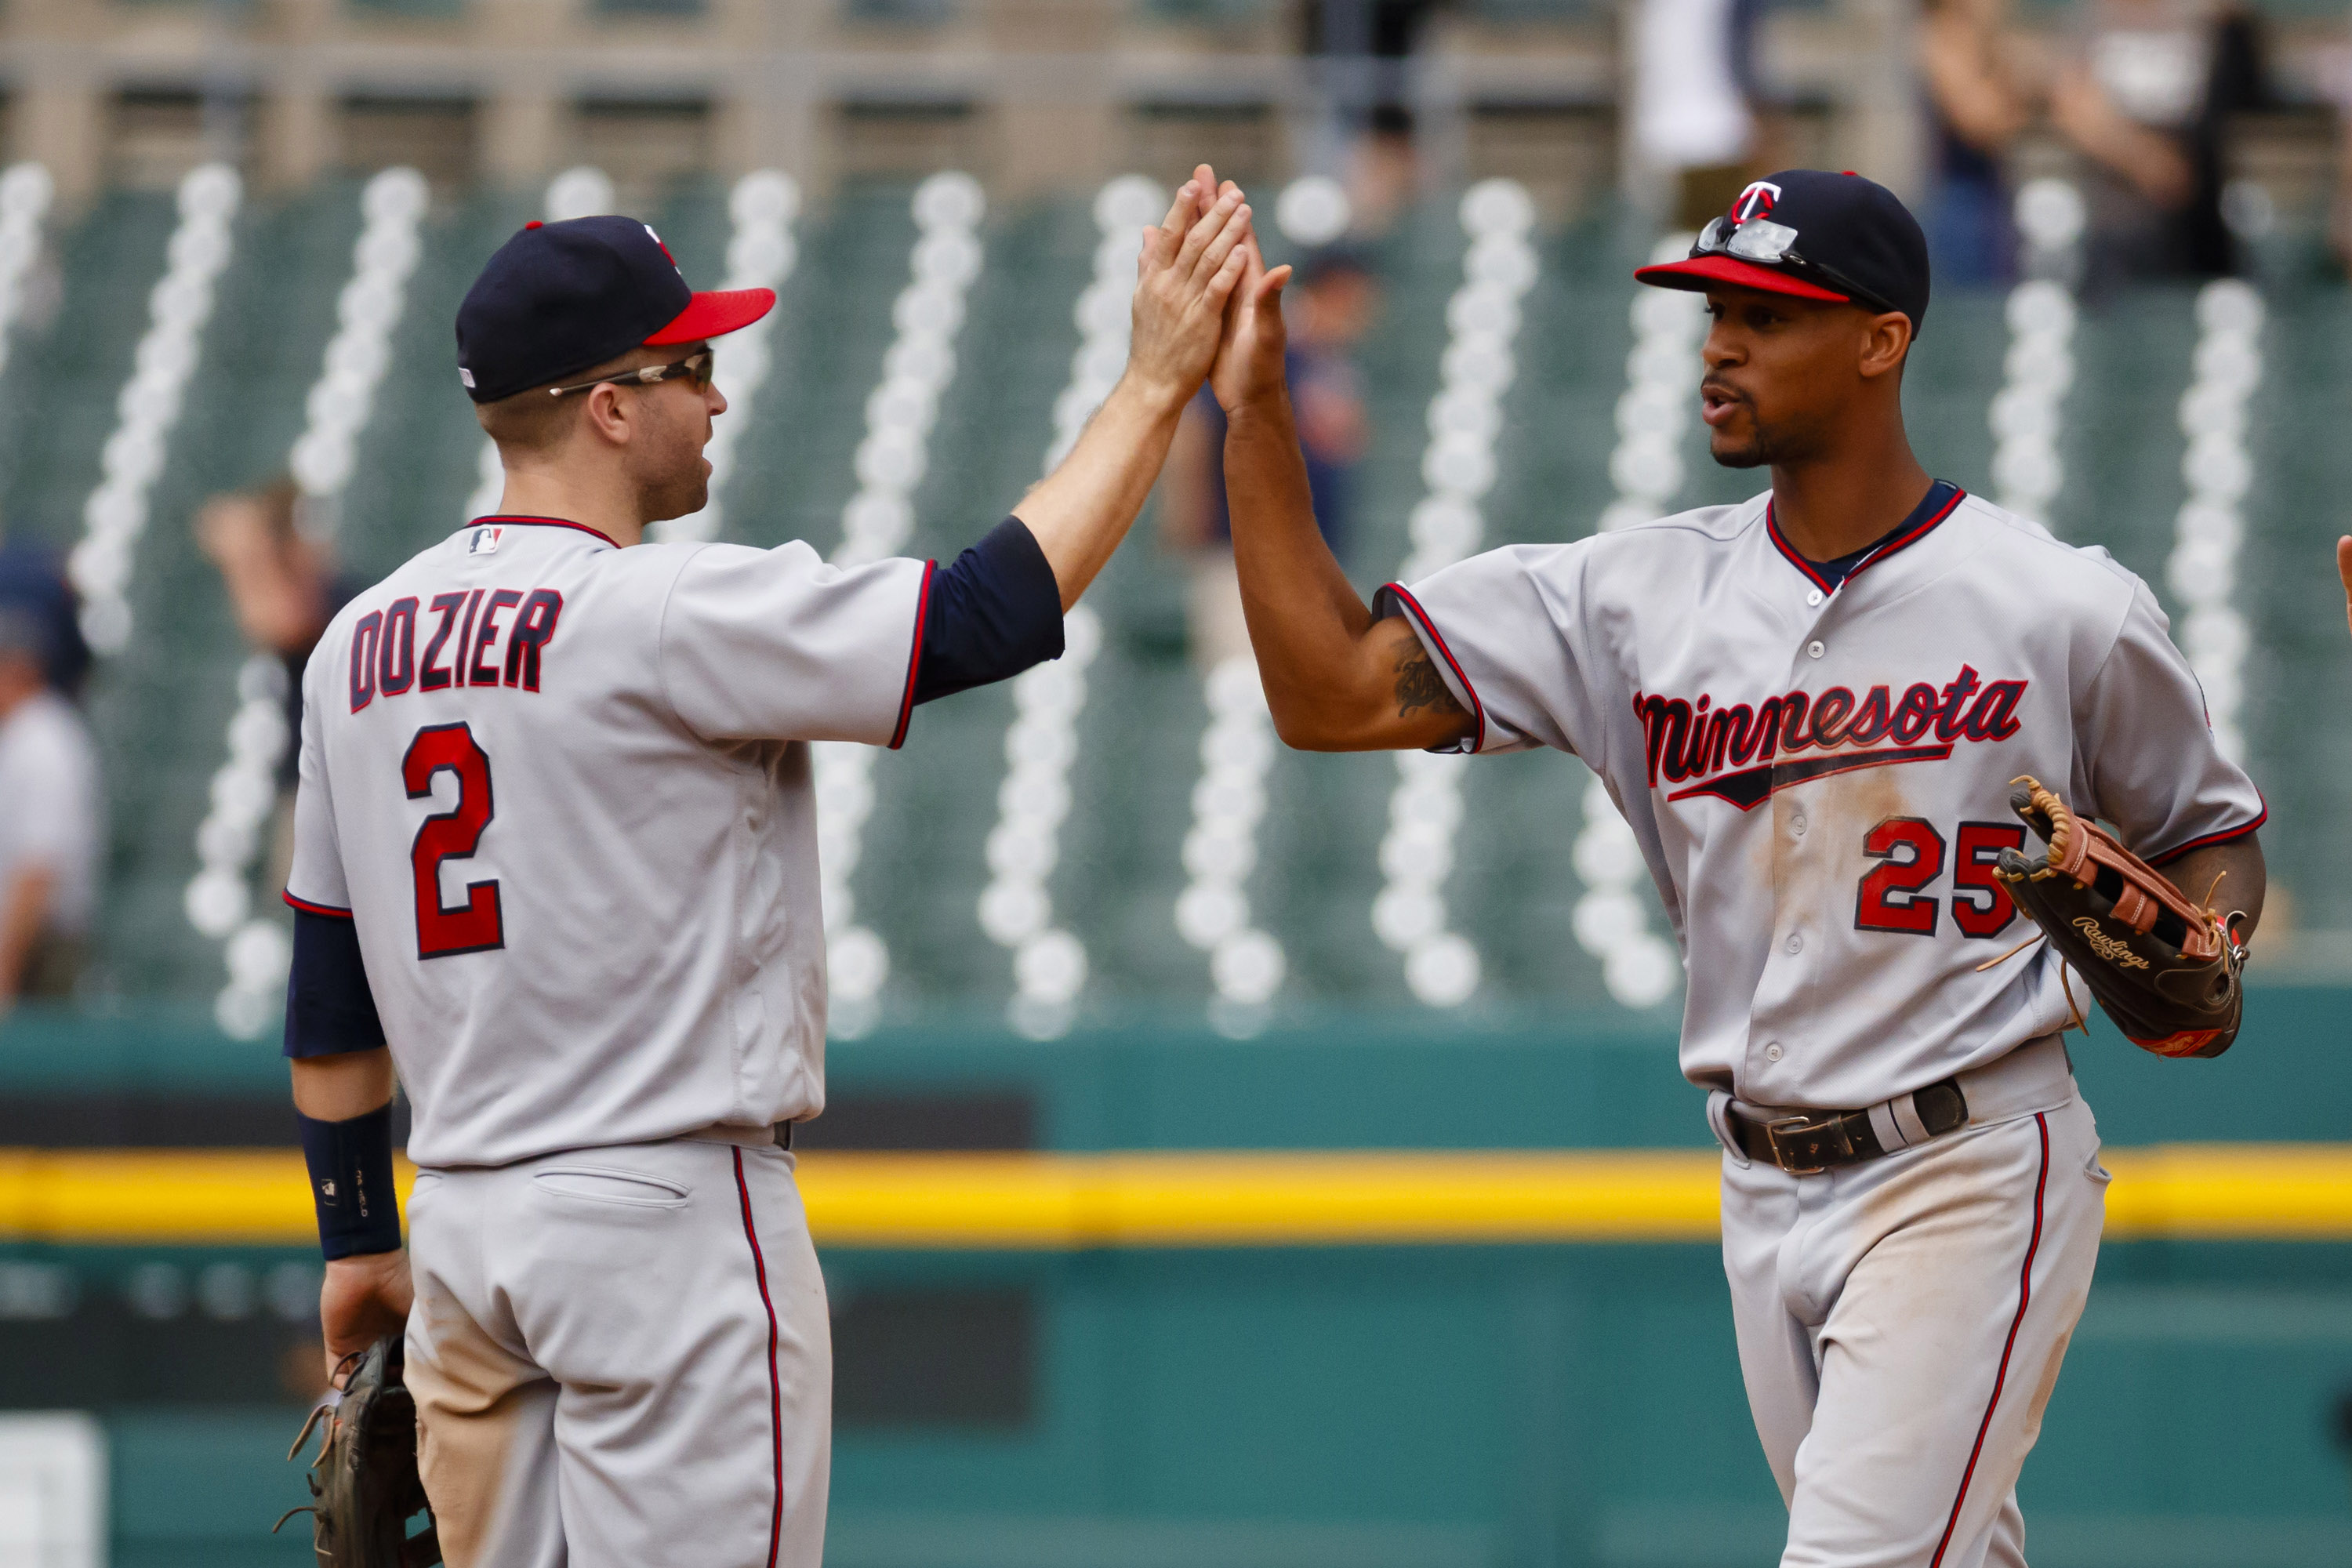 Byron Buxton and Brian Dozier